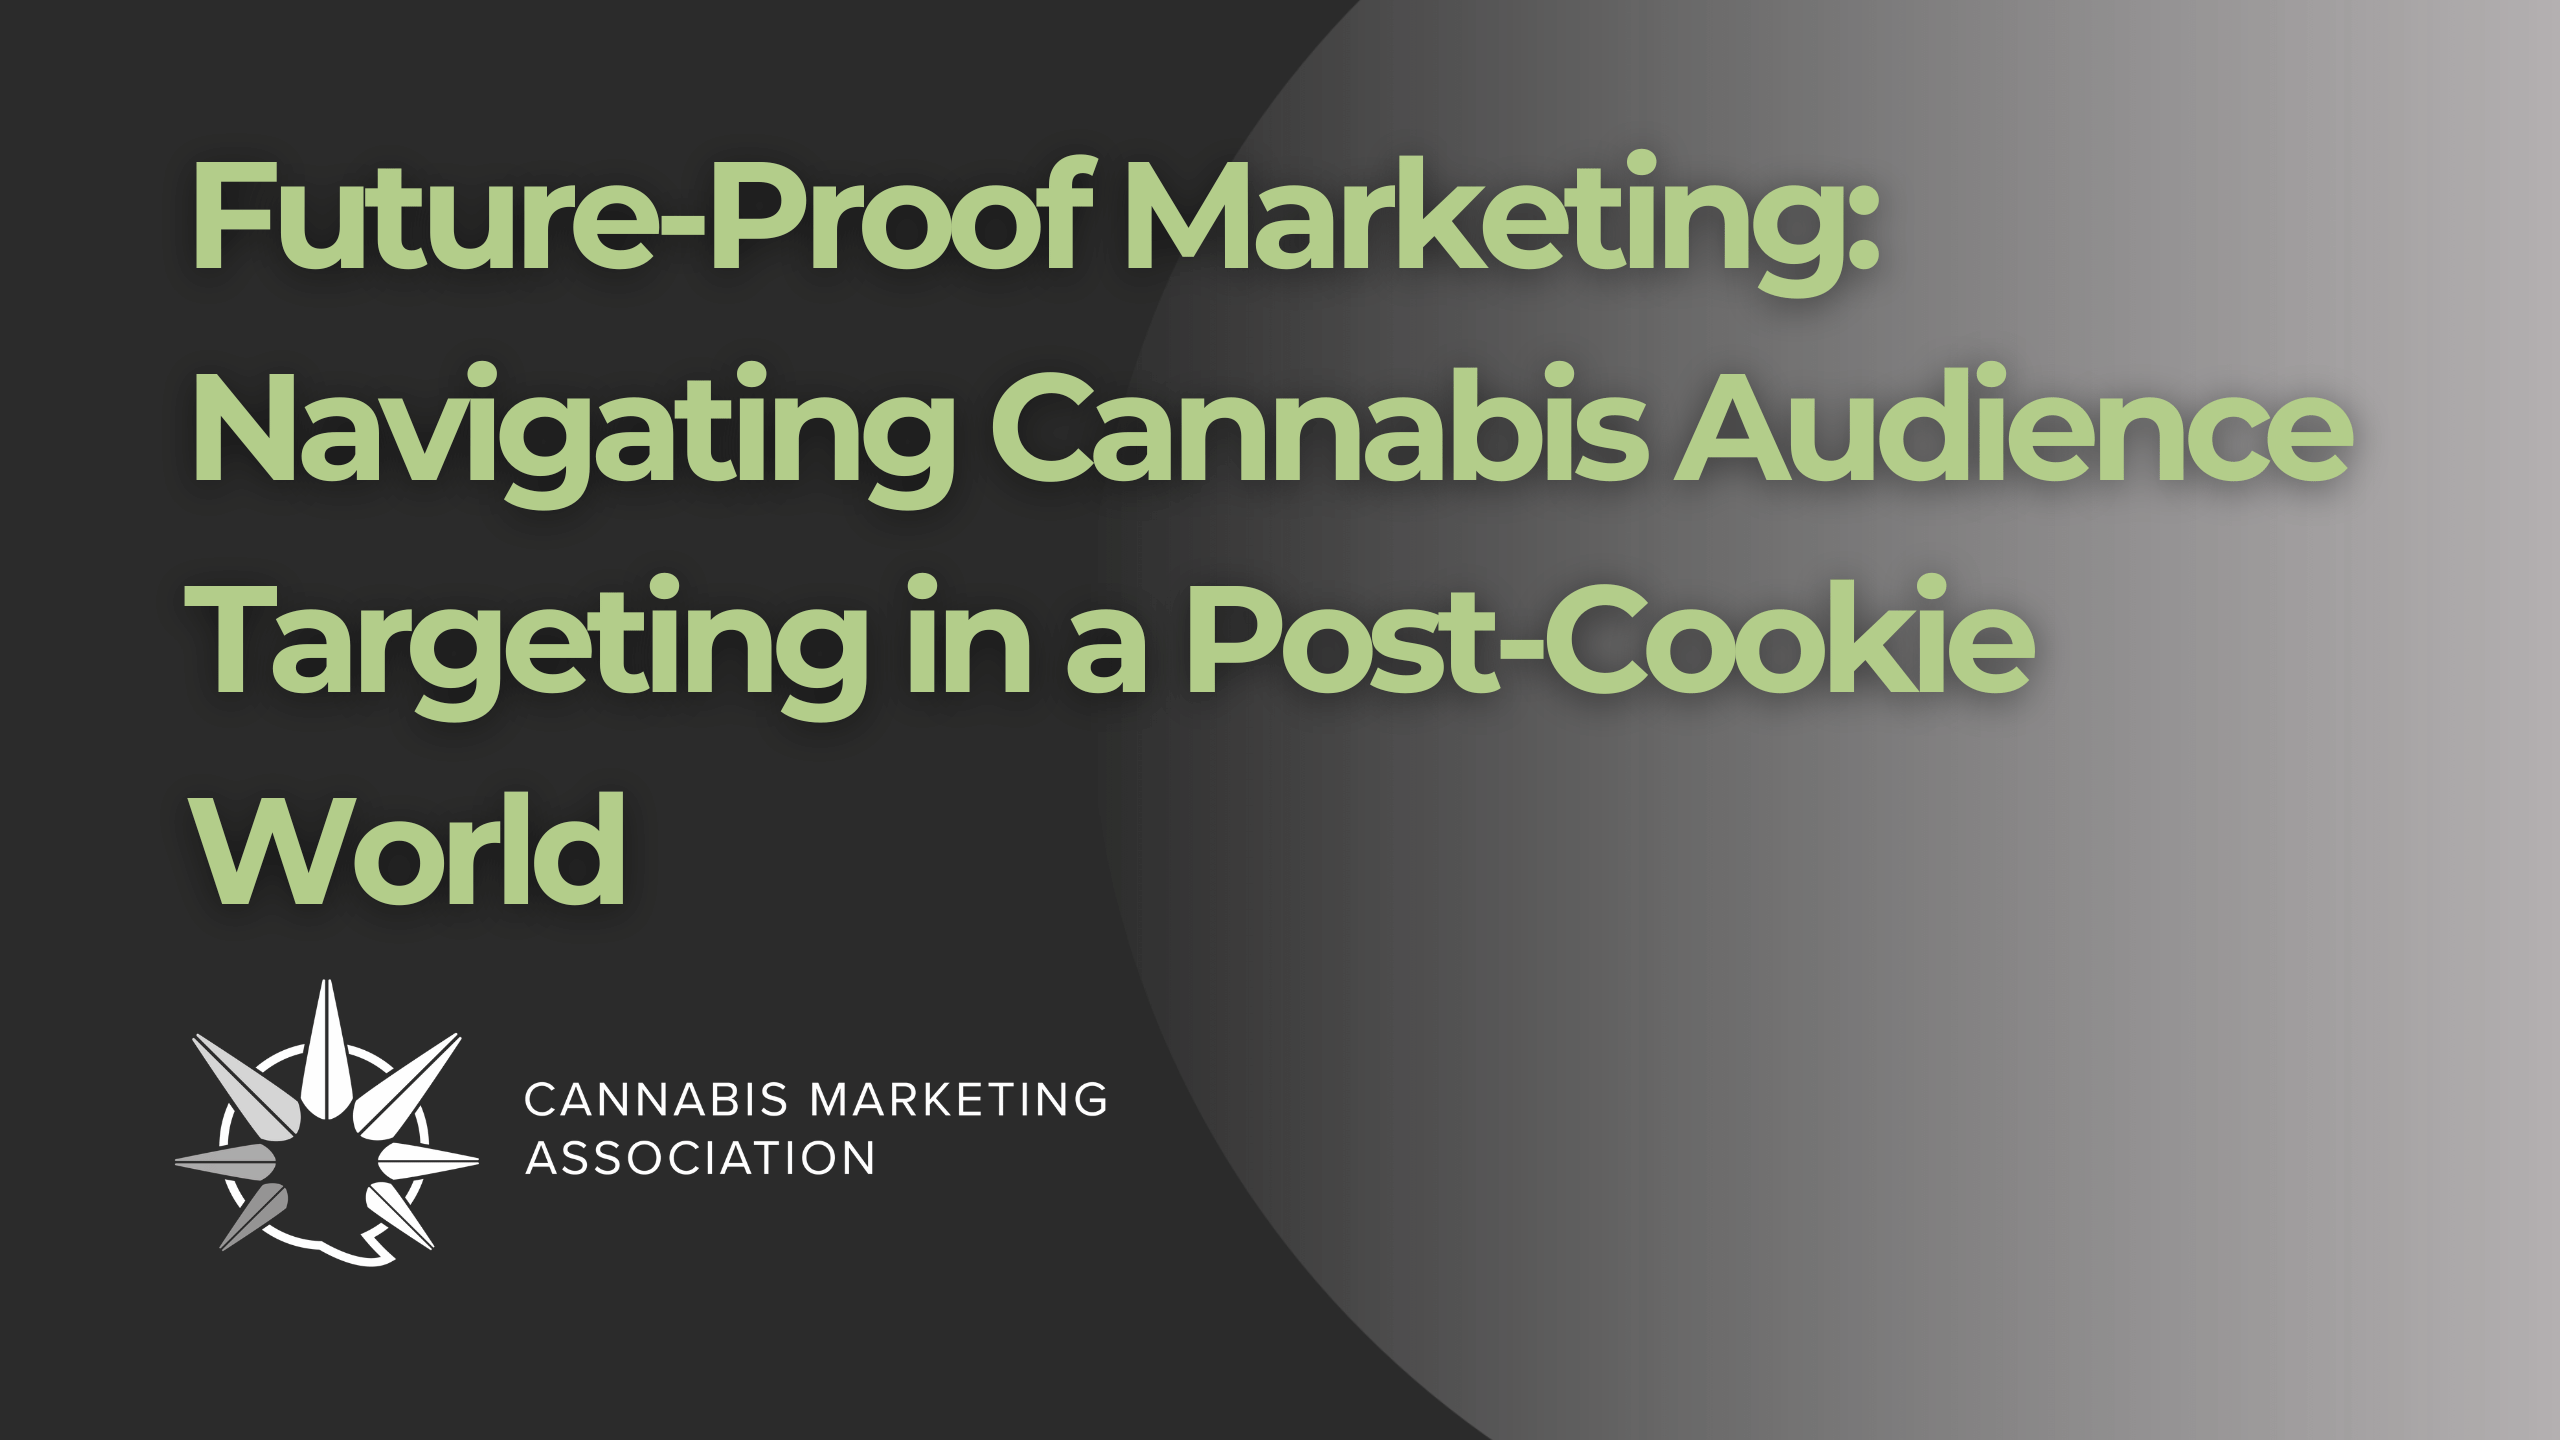 Future-Proof Marketing: Navigating Cannabis Audience Targeting in a Post-Cookie World